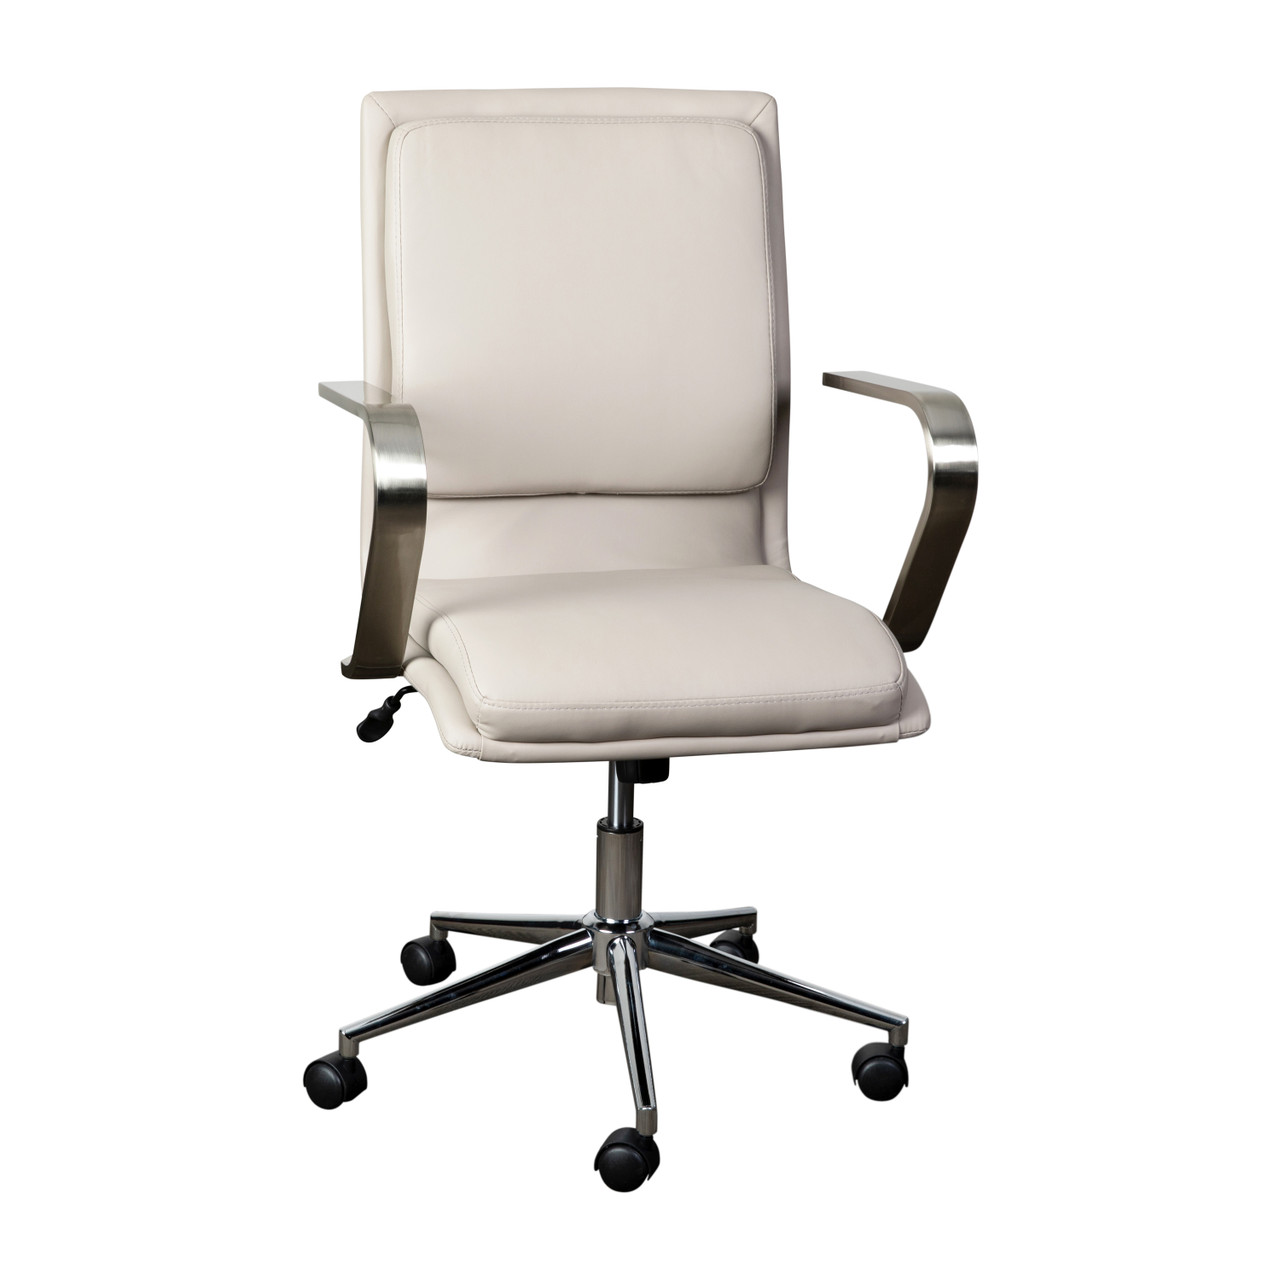 Flash Furniture James Mid-Back Designer Executive LeatherSoft Office Chair w/ Brushed Chrome Base & Arms, Taupe, Model# GO-21111B-TAUPE-CHR-GG